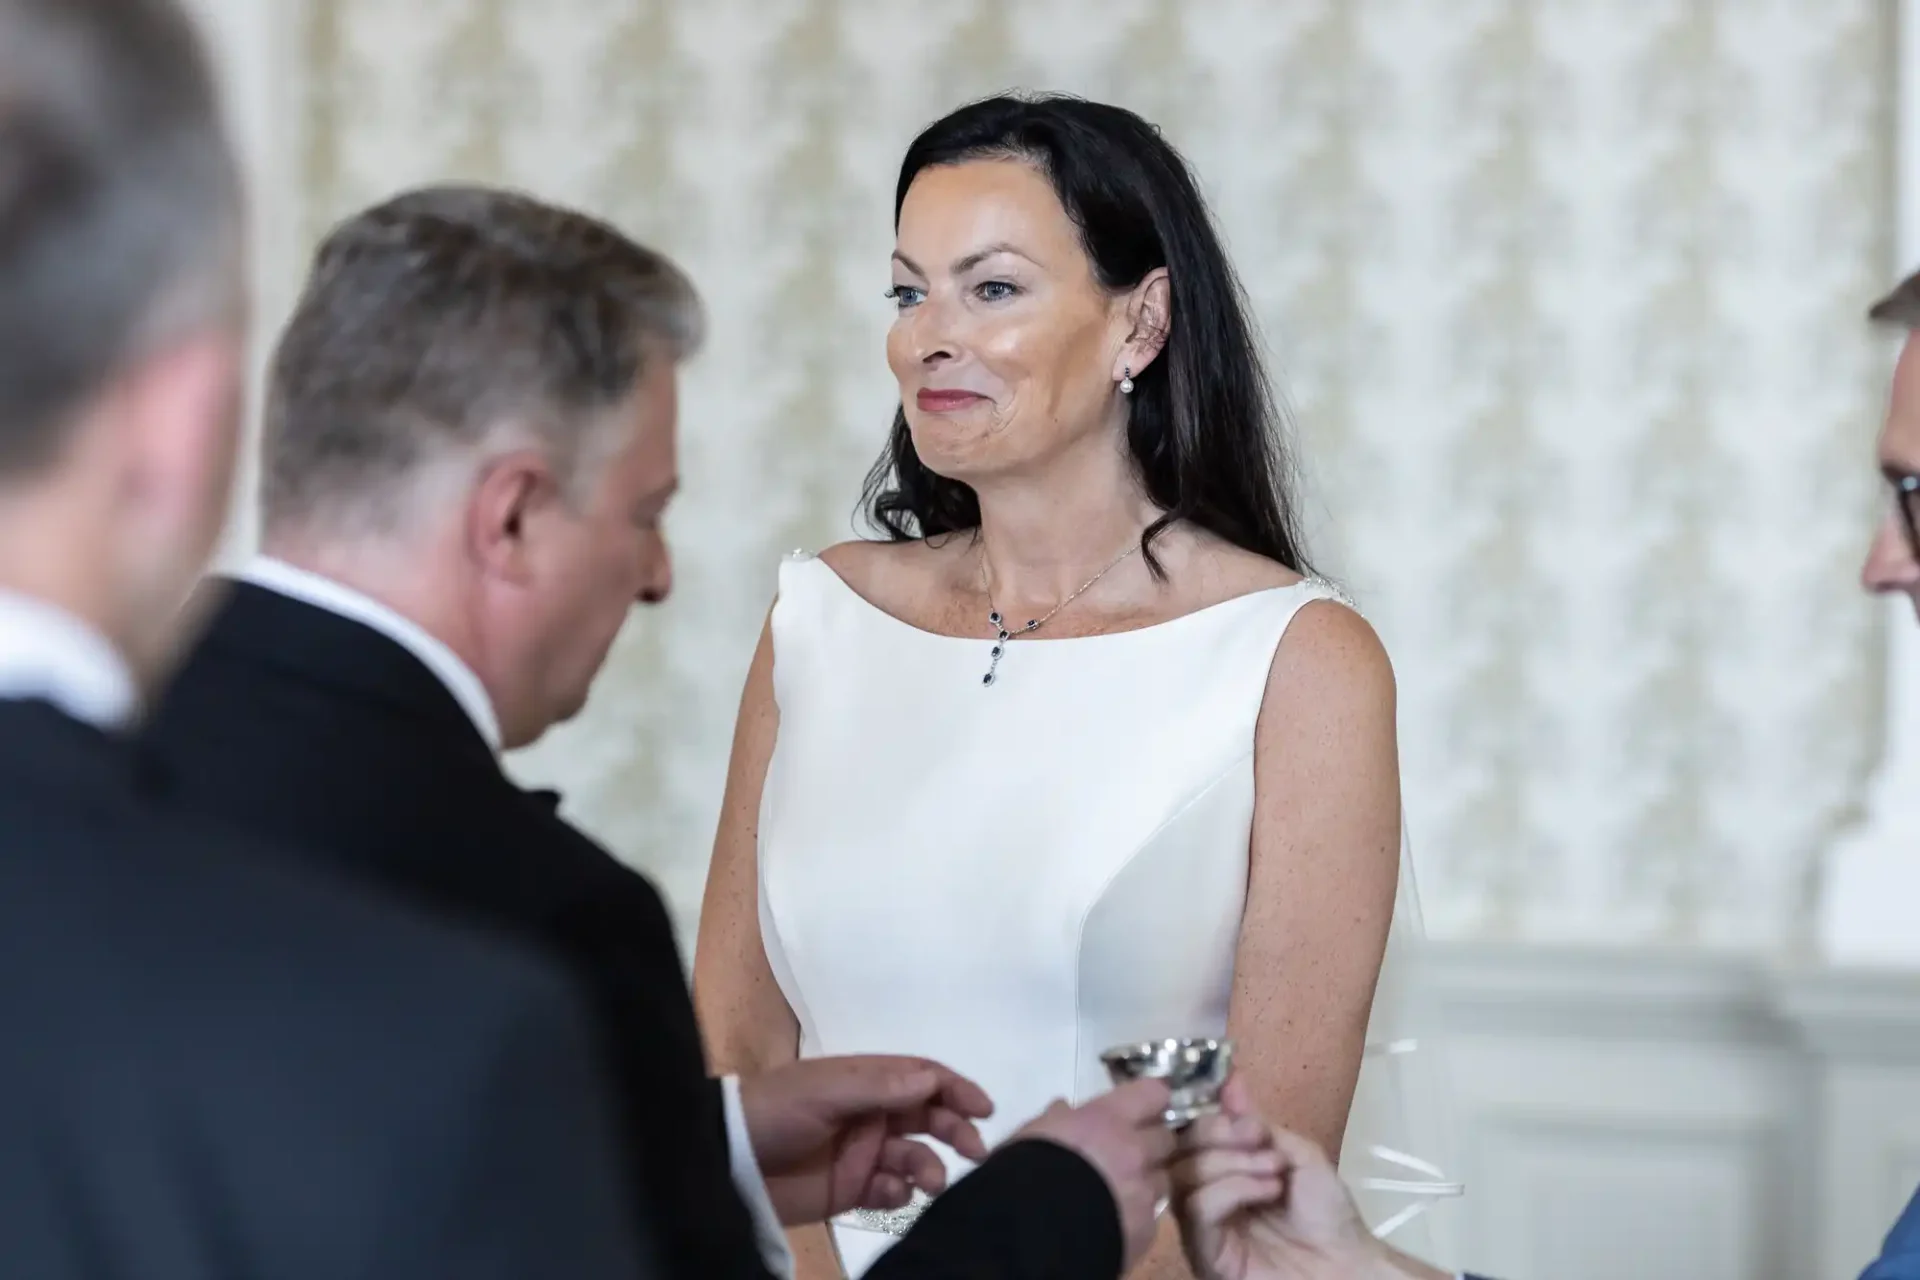 A woman in a white dress smiles while interacting with a man in a suit at a formal event, with another attendee partially visible.